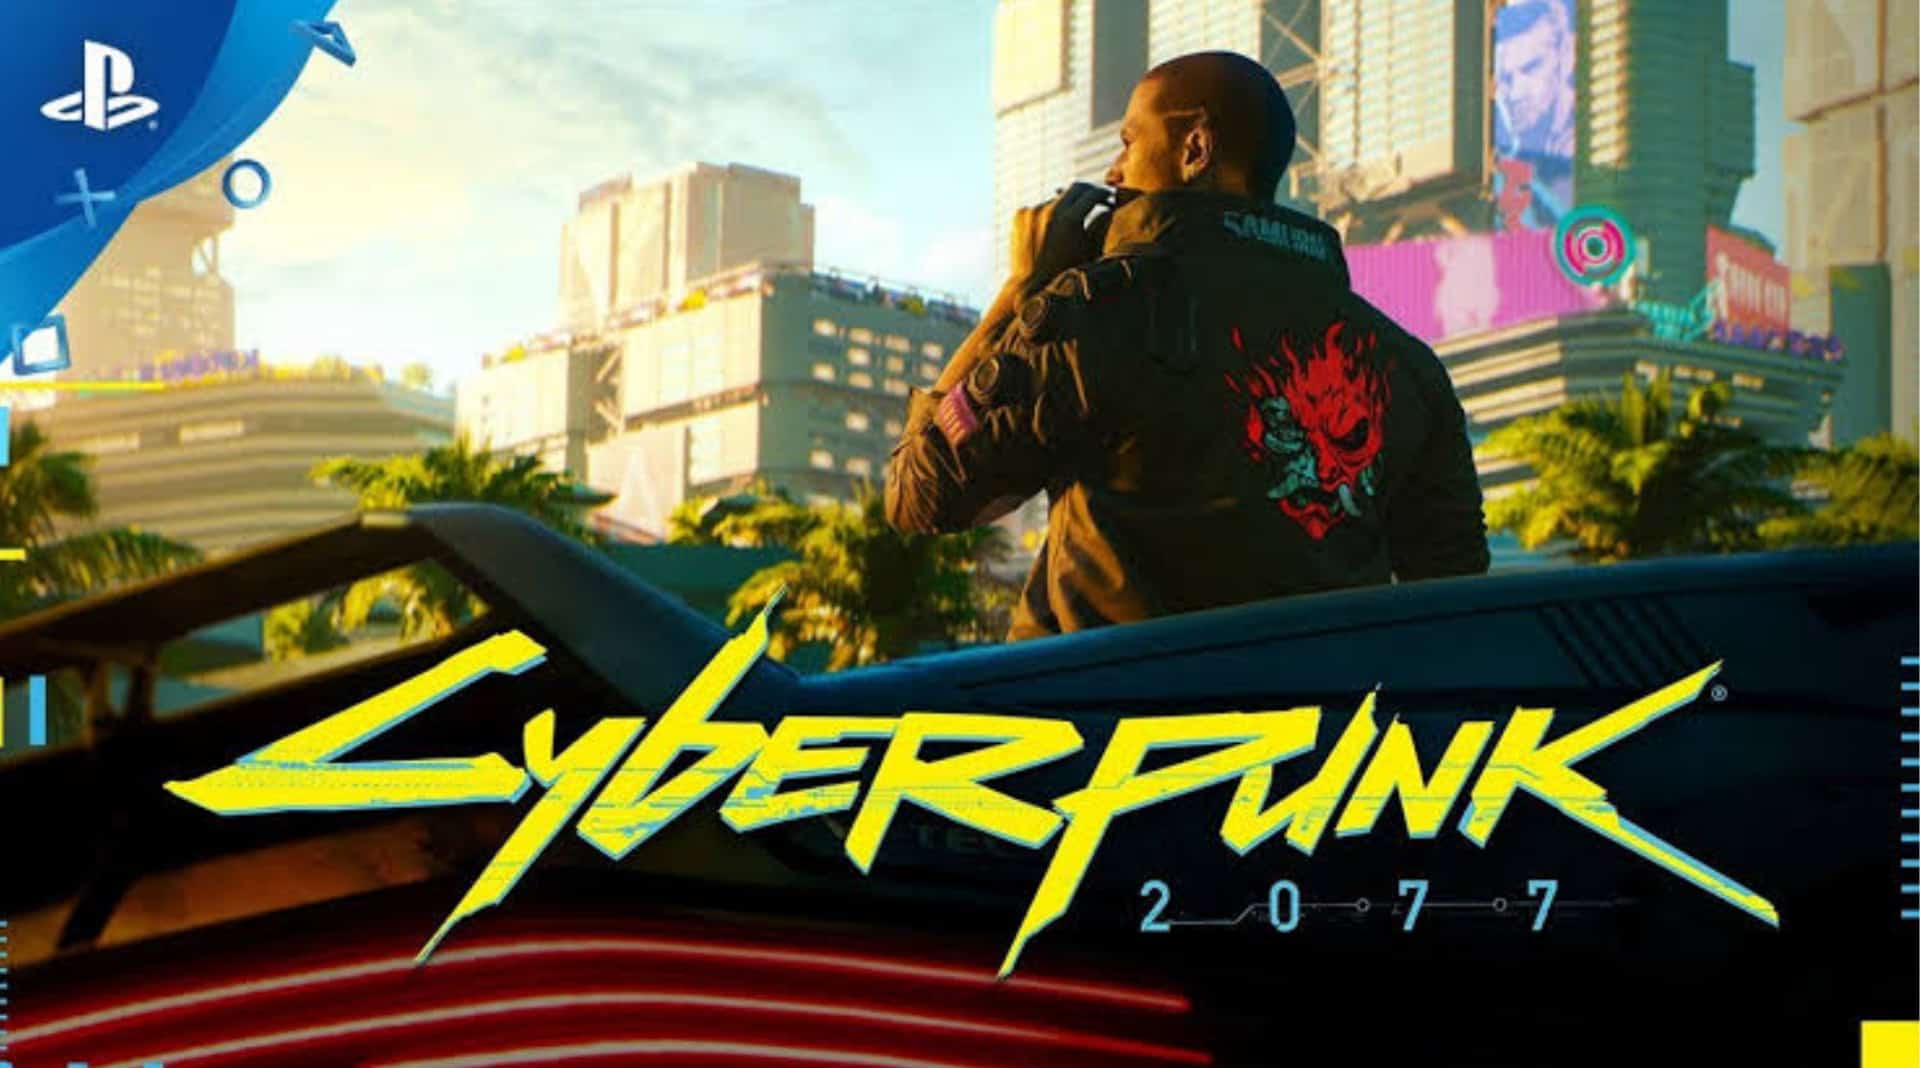 PlayStation Releases New Trailer of Cyberpunk 2077, Introduces Fleet of Future Cars